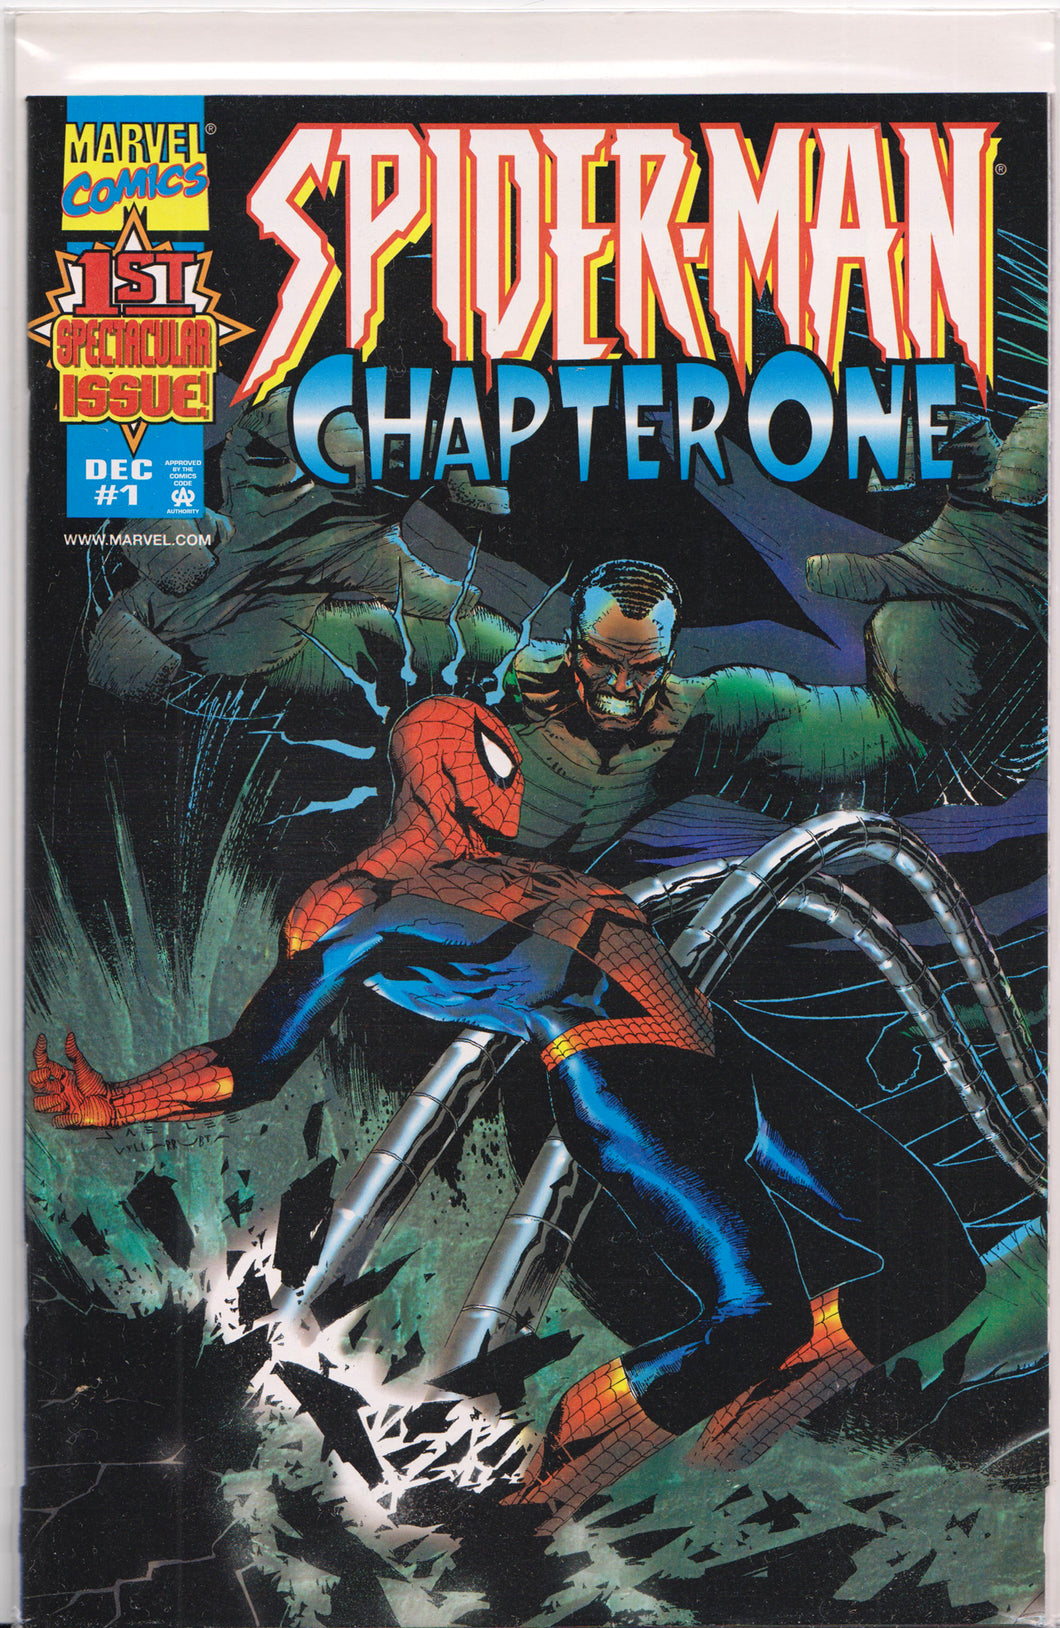 SPIDER-MAN: CHAPTER ONE #1 (MARVEL KNIGHTS)(DYNAMIC FORCES JAE LEE EXCLUSIVE) COMIC BOOK ~ Marvel Comics